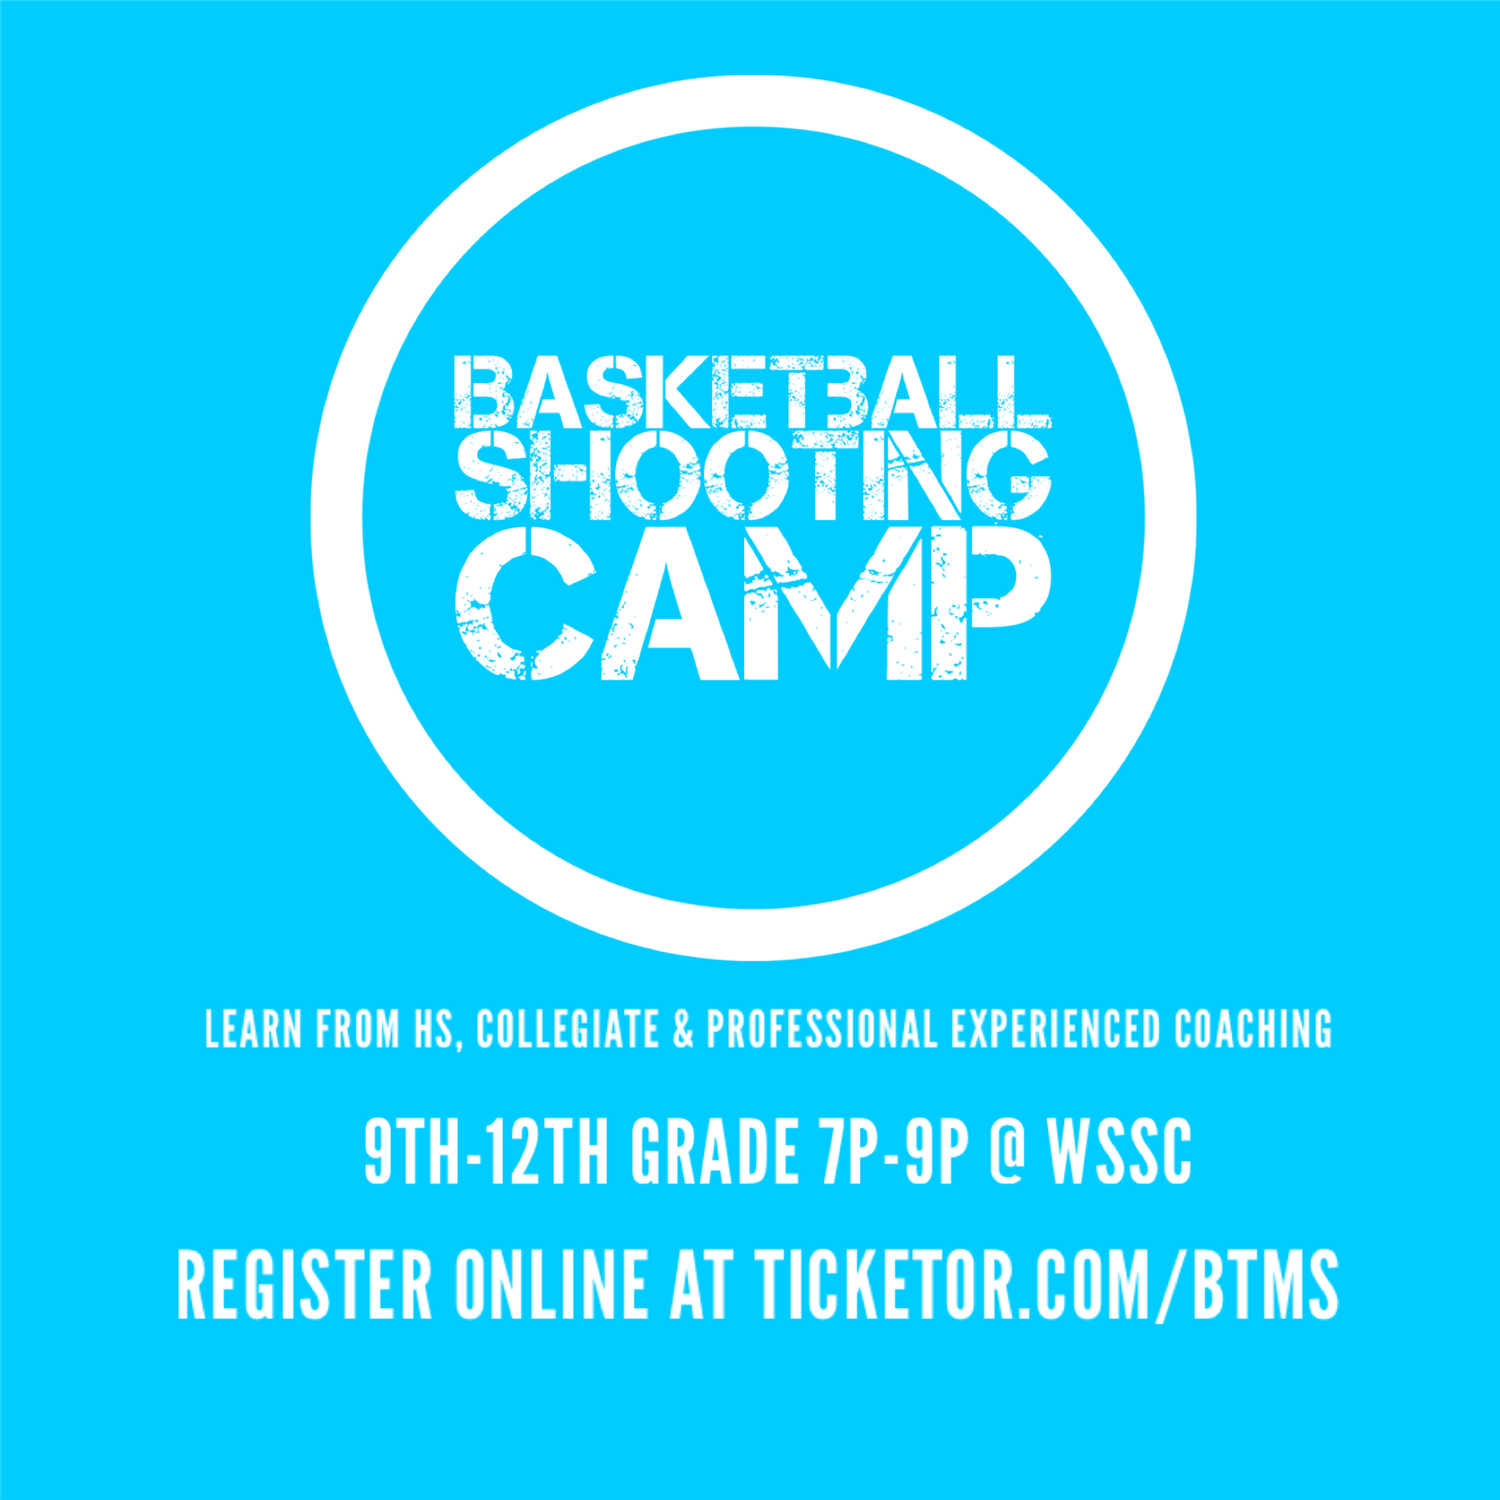 Basketball Shooting Camp 9th-12th Grade  on Jun 24, 19:00@West Suburban Sports Complex - Buy tickets and Get information on BTMS LLC 